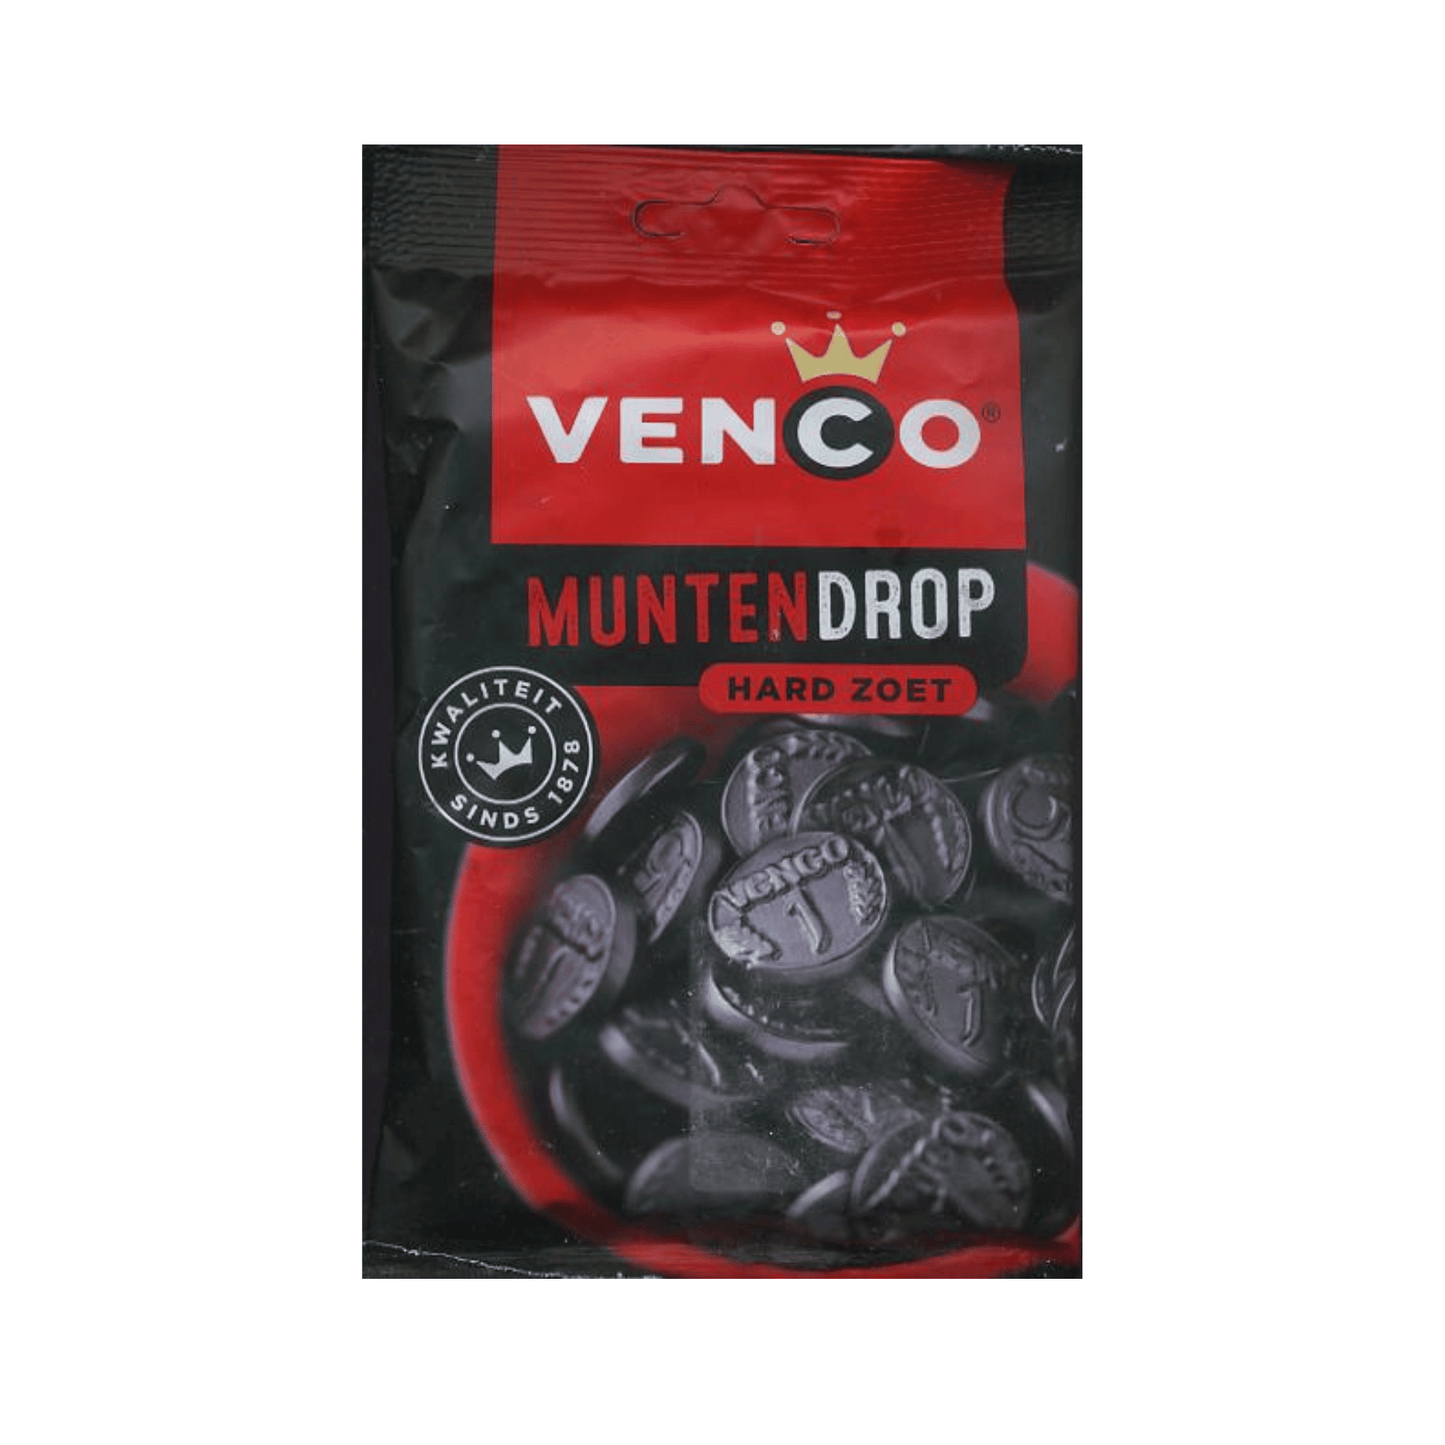 Primary Image of Muntendrop Licorice Coins